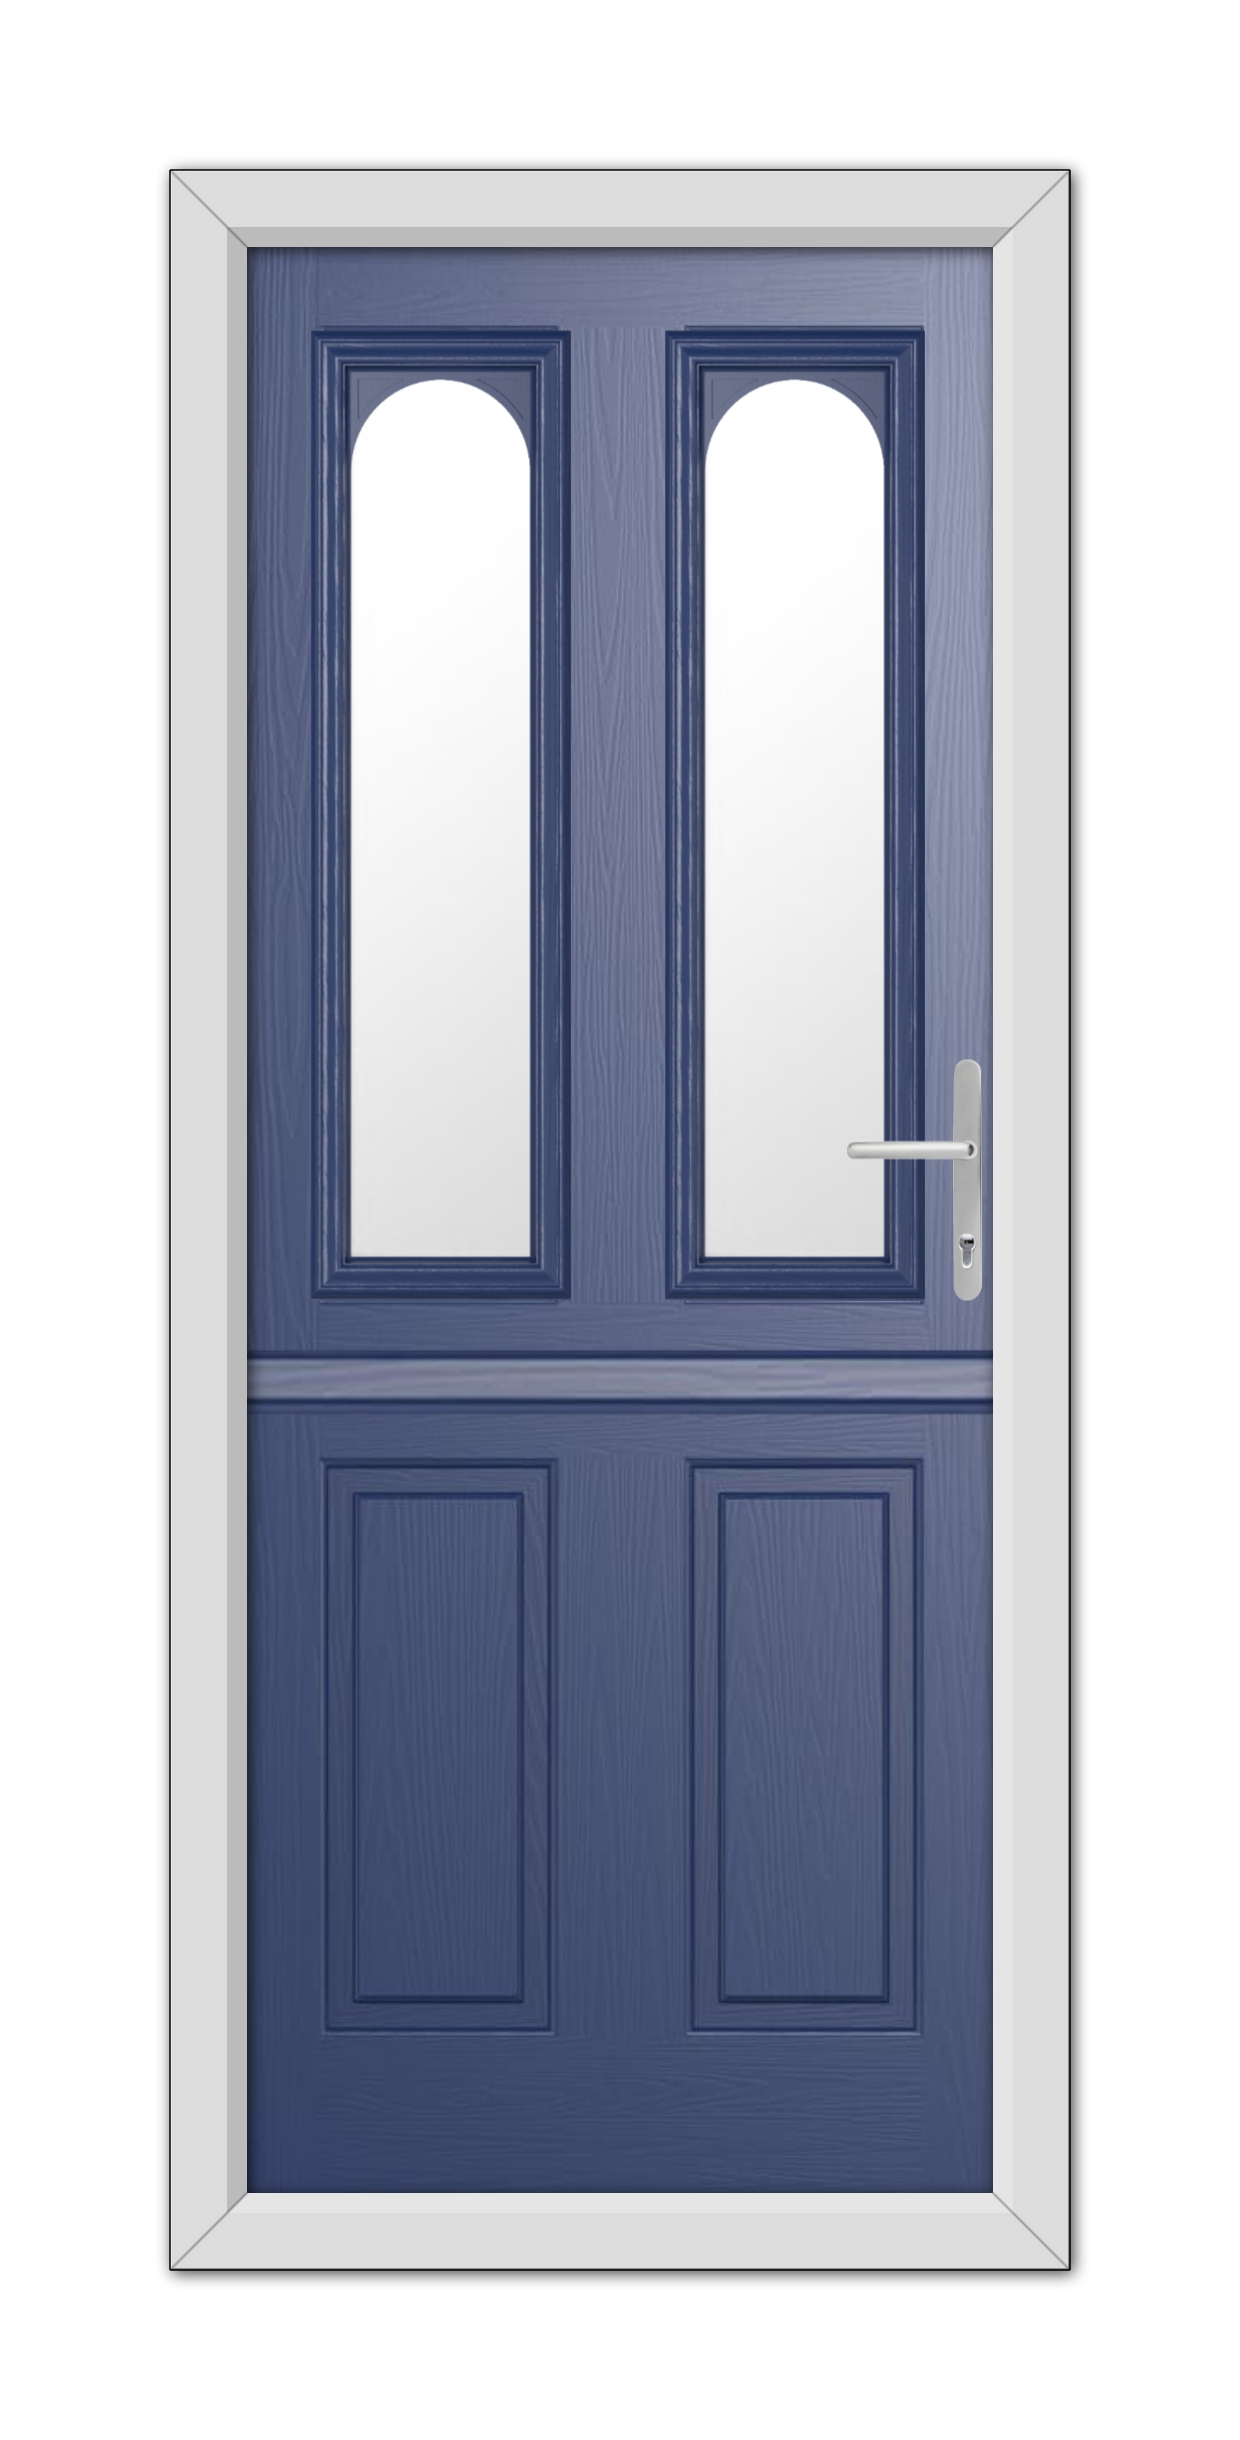 A modern Blue Elmhurst Stable Composite Door 48mm Timber Core with white framed glass windows on the upper half and solid panels on the lower half, featuring a silver handle on the right.